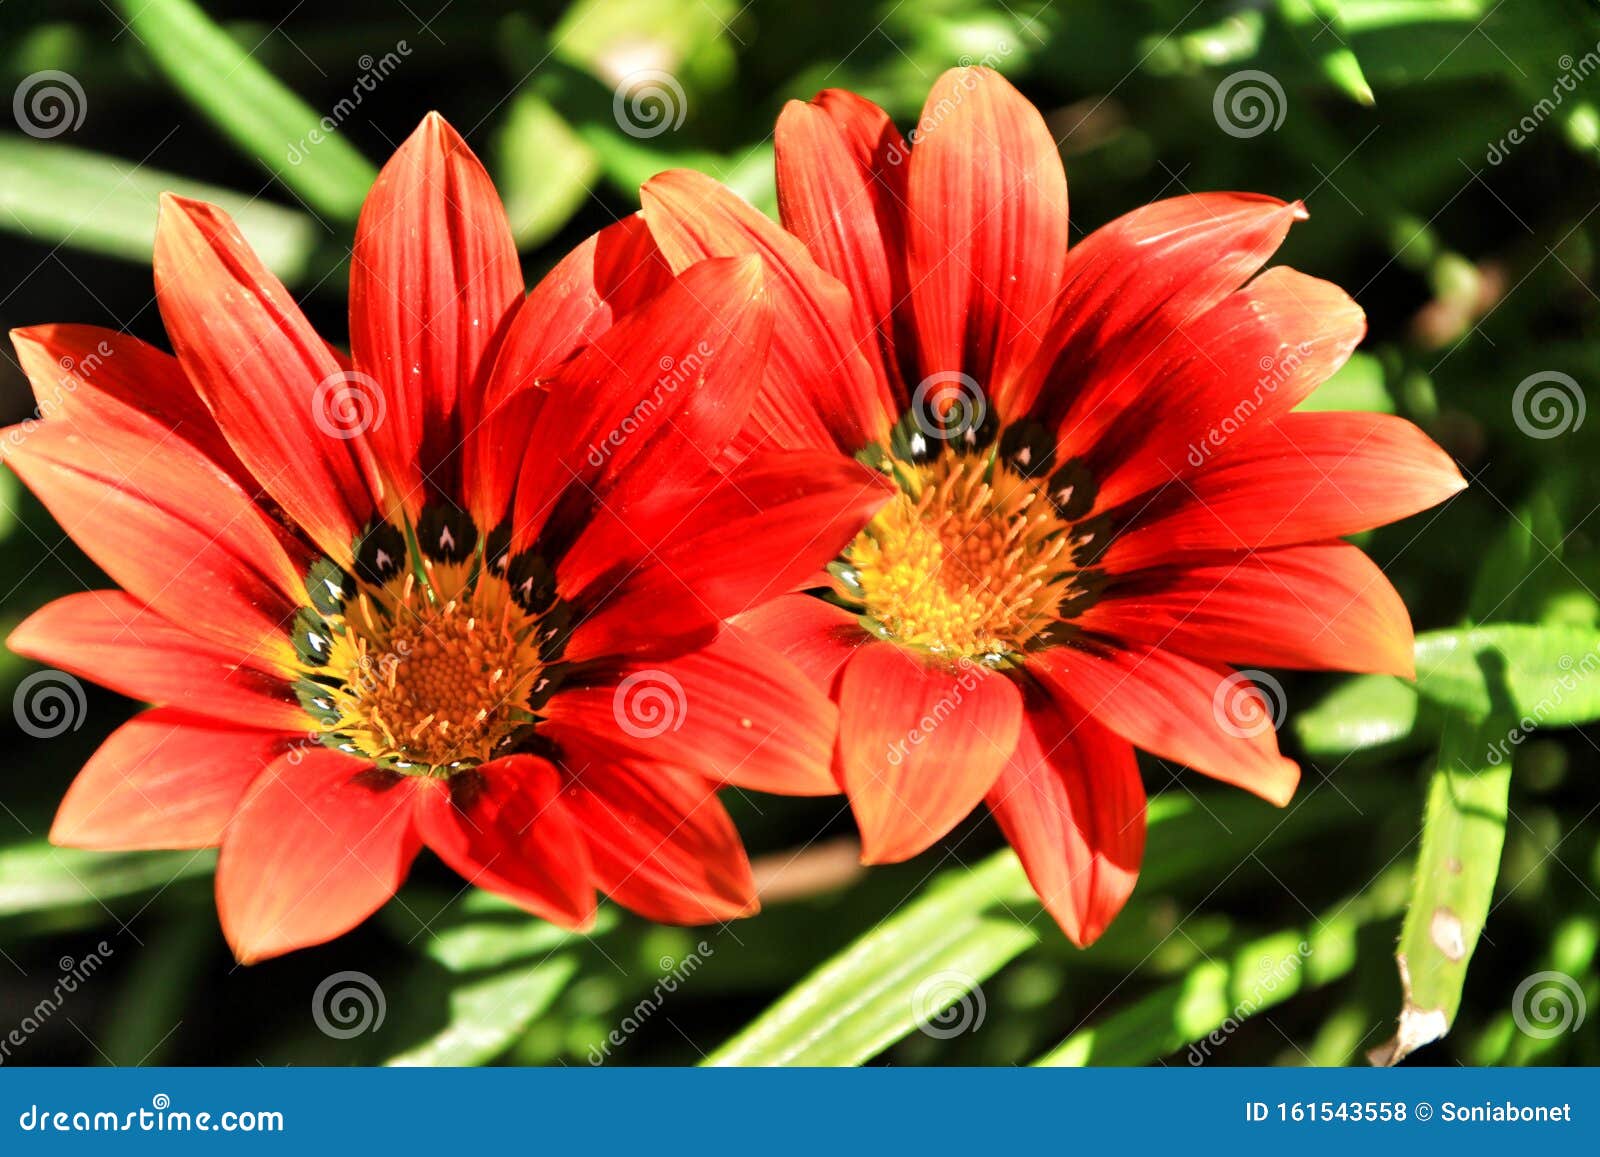 Colorful Red Gazania Flower In The Garden Stock Photo Image Of Sunny Single 161543558